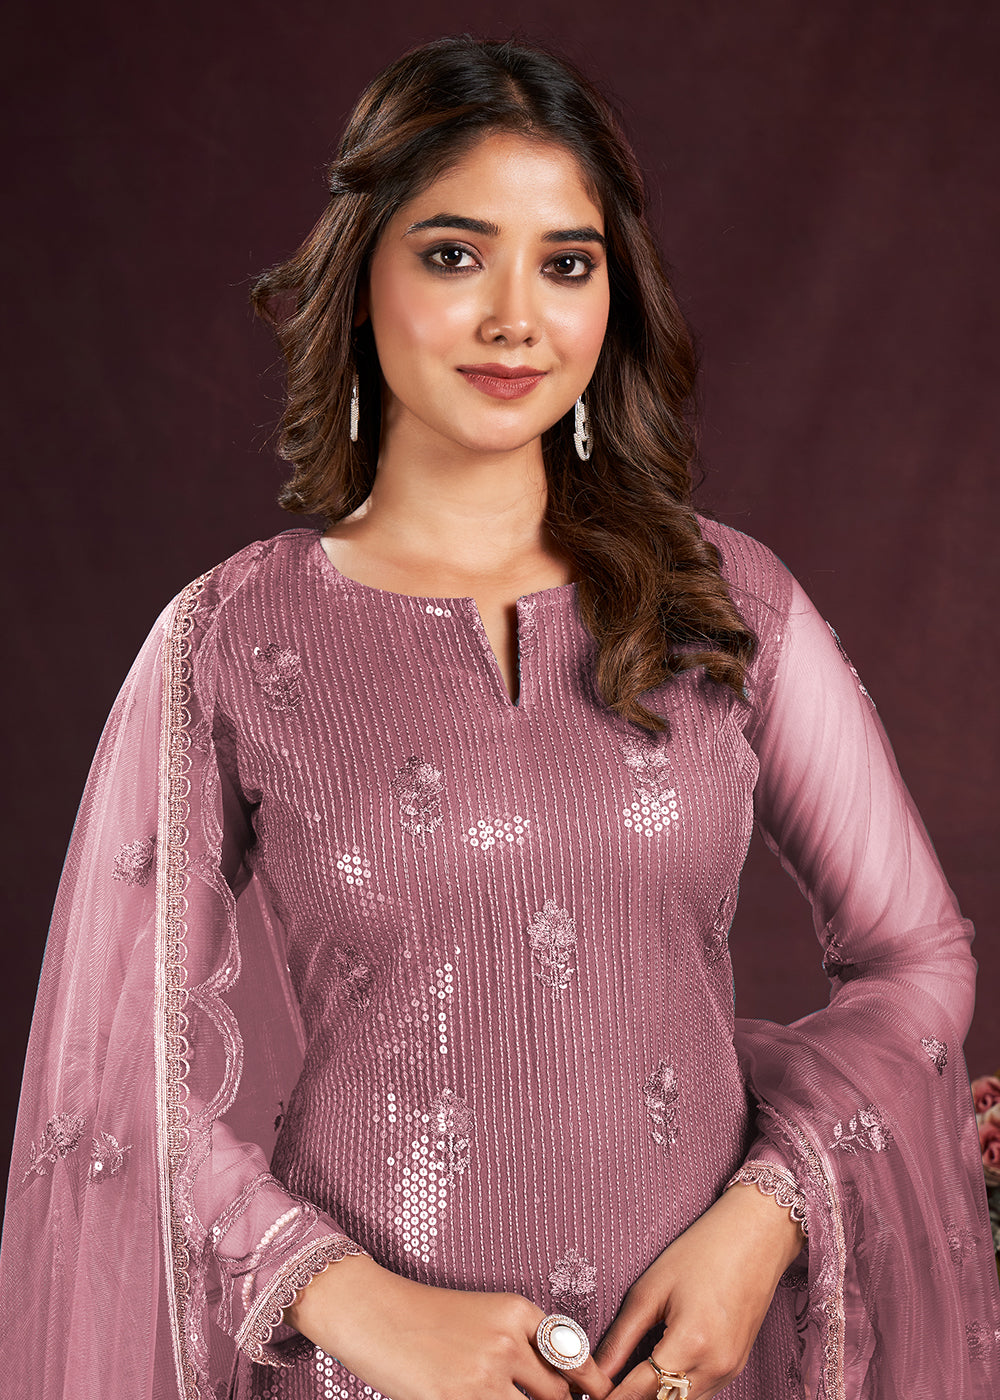 Buy Now Rose Pink Butterfly Net Embroidered Festive Salwar Suit Online in USA, UK, Canada, Germany, Australia & Worldwide at Empress Clothing. 